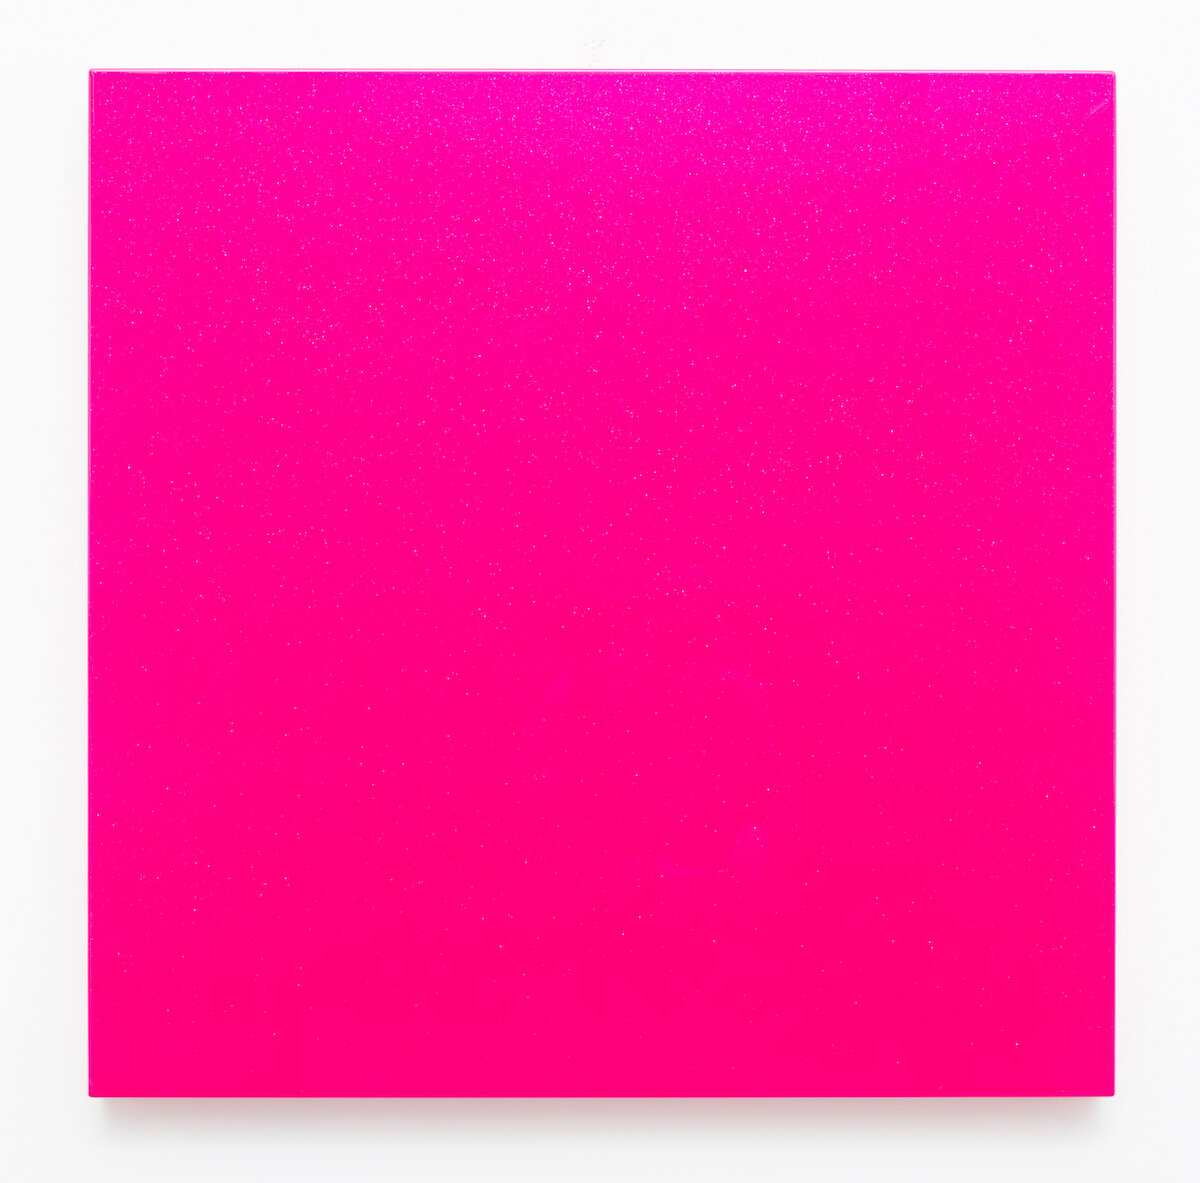  Rubén Ortiz Torres  Barragán Porn , 2017 urethane, candy flake, and chromaluscent paint on aluminum 36 x 36 in (91.4 x 91.4 cm) 